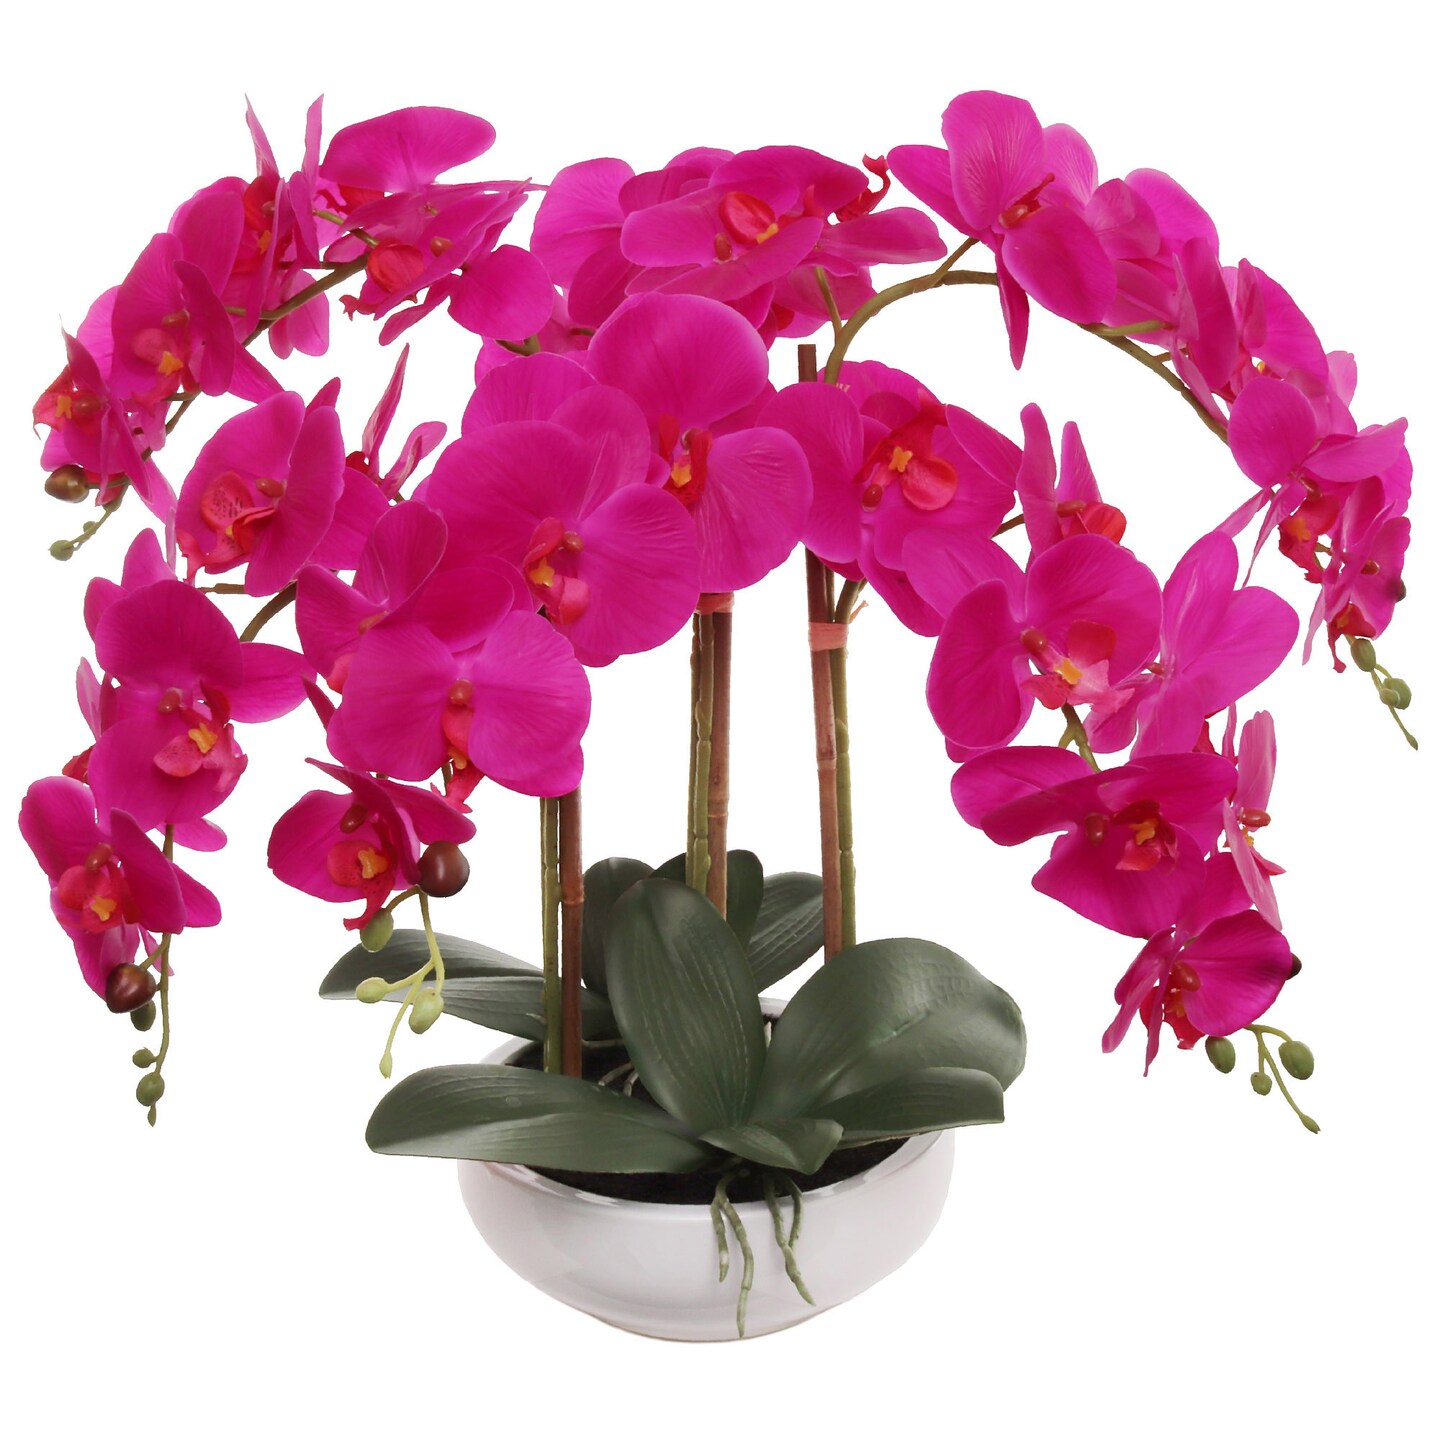 Fuchsia Phalaenopsis Orchid Flowers in White Ceramic Vase by Floral ...